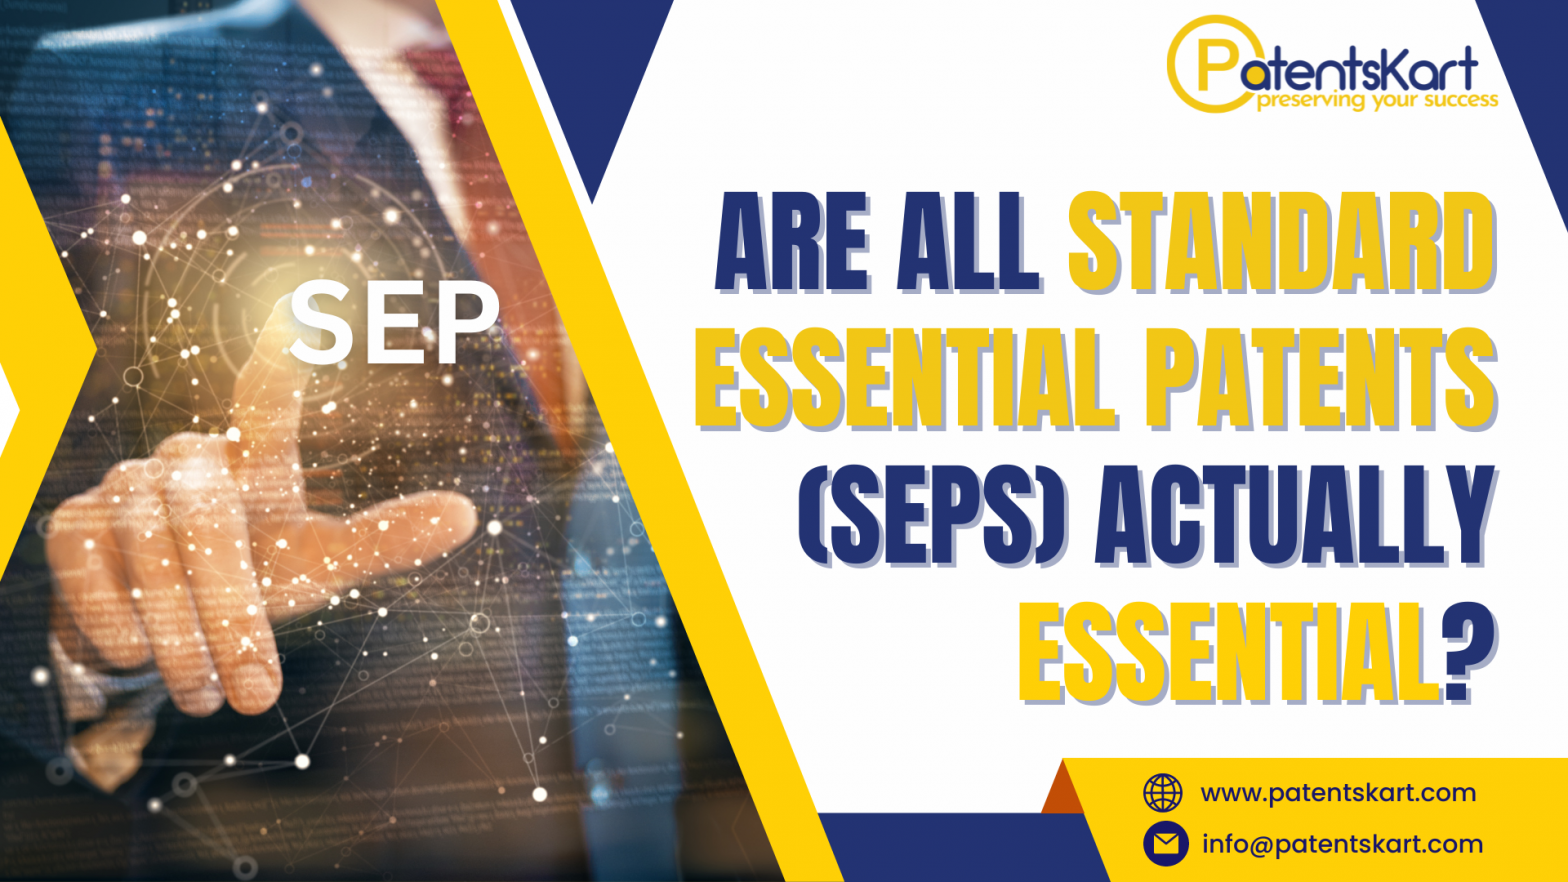 Standard Essential Patents (SEPs)